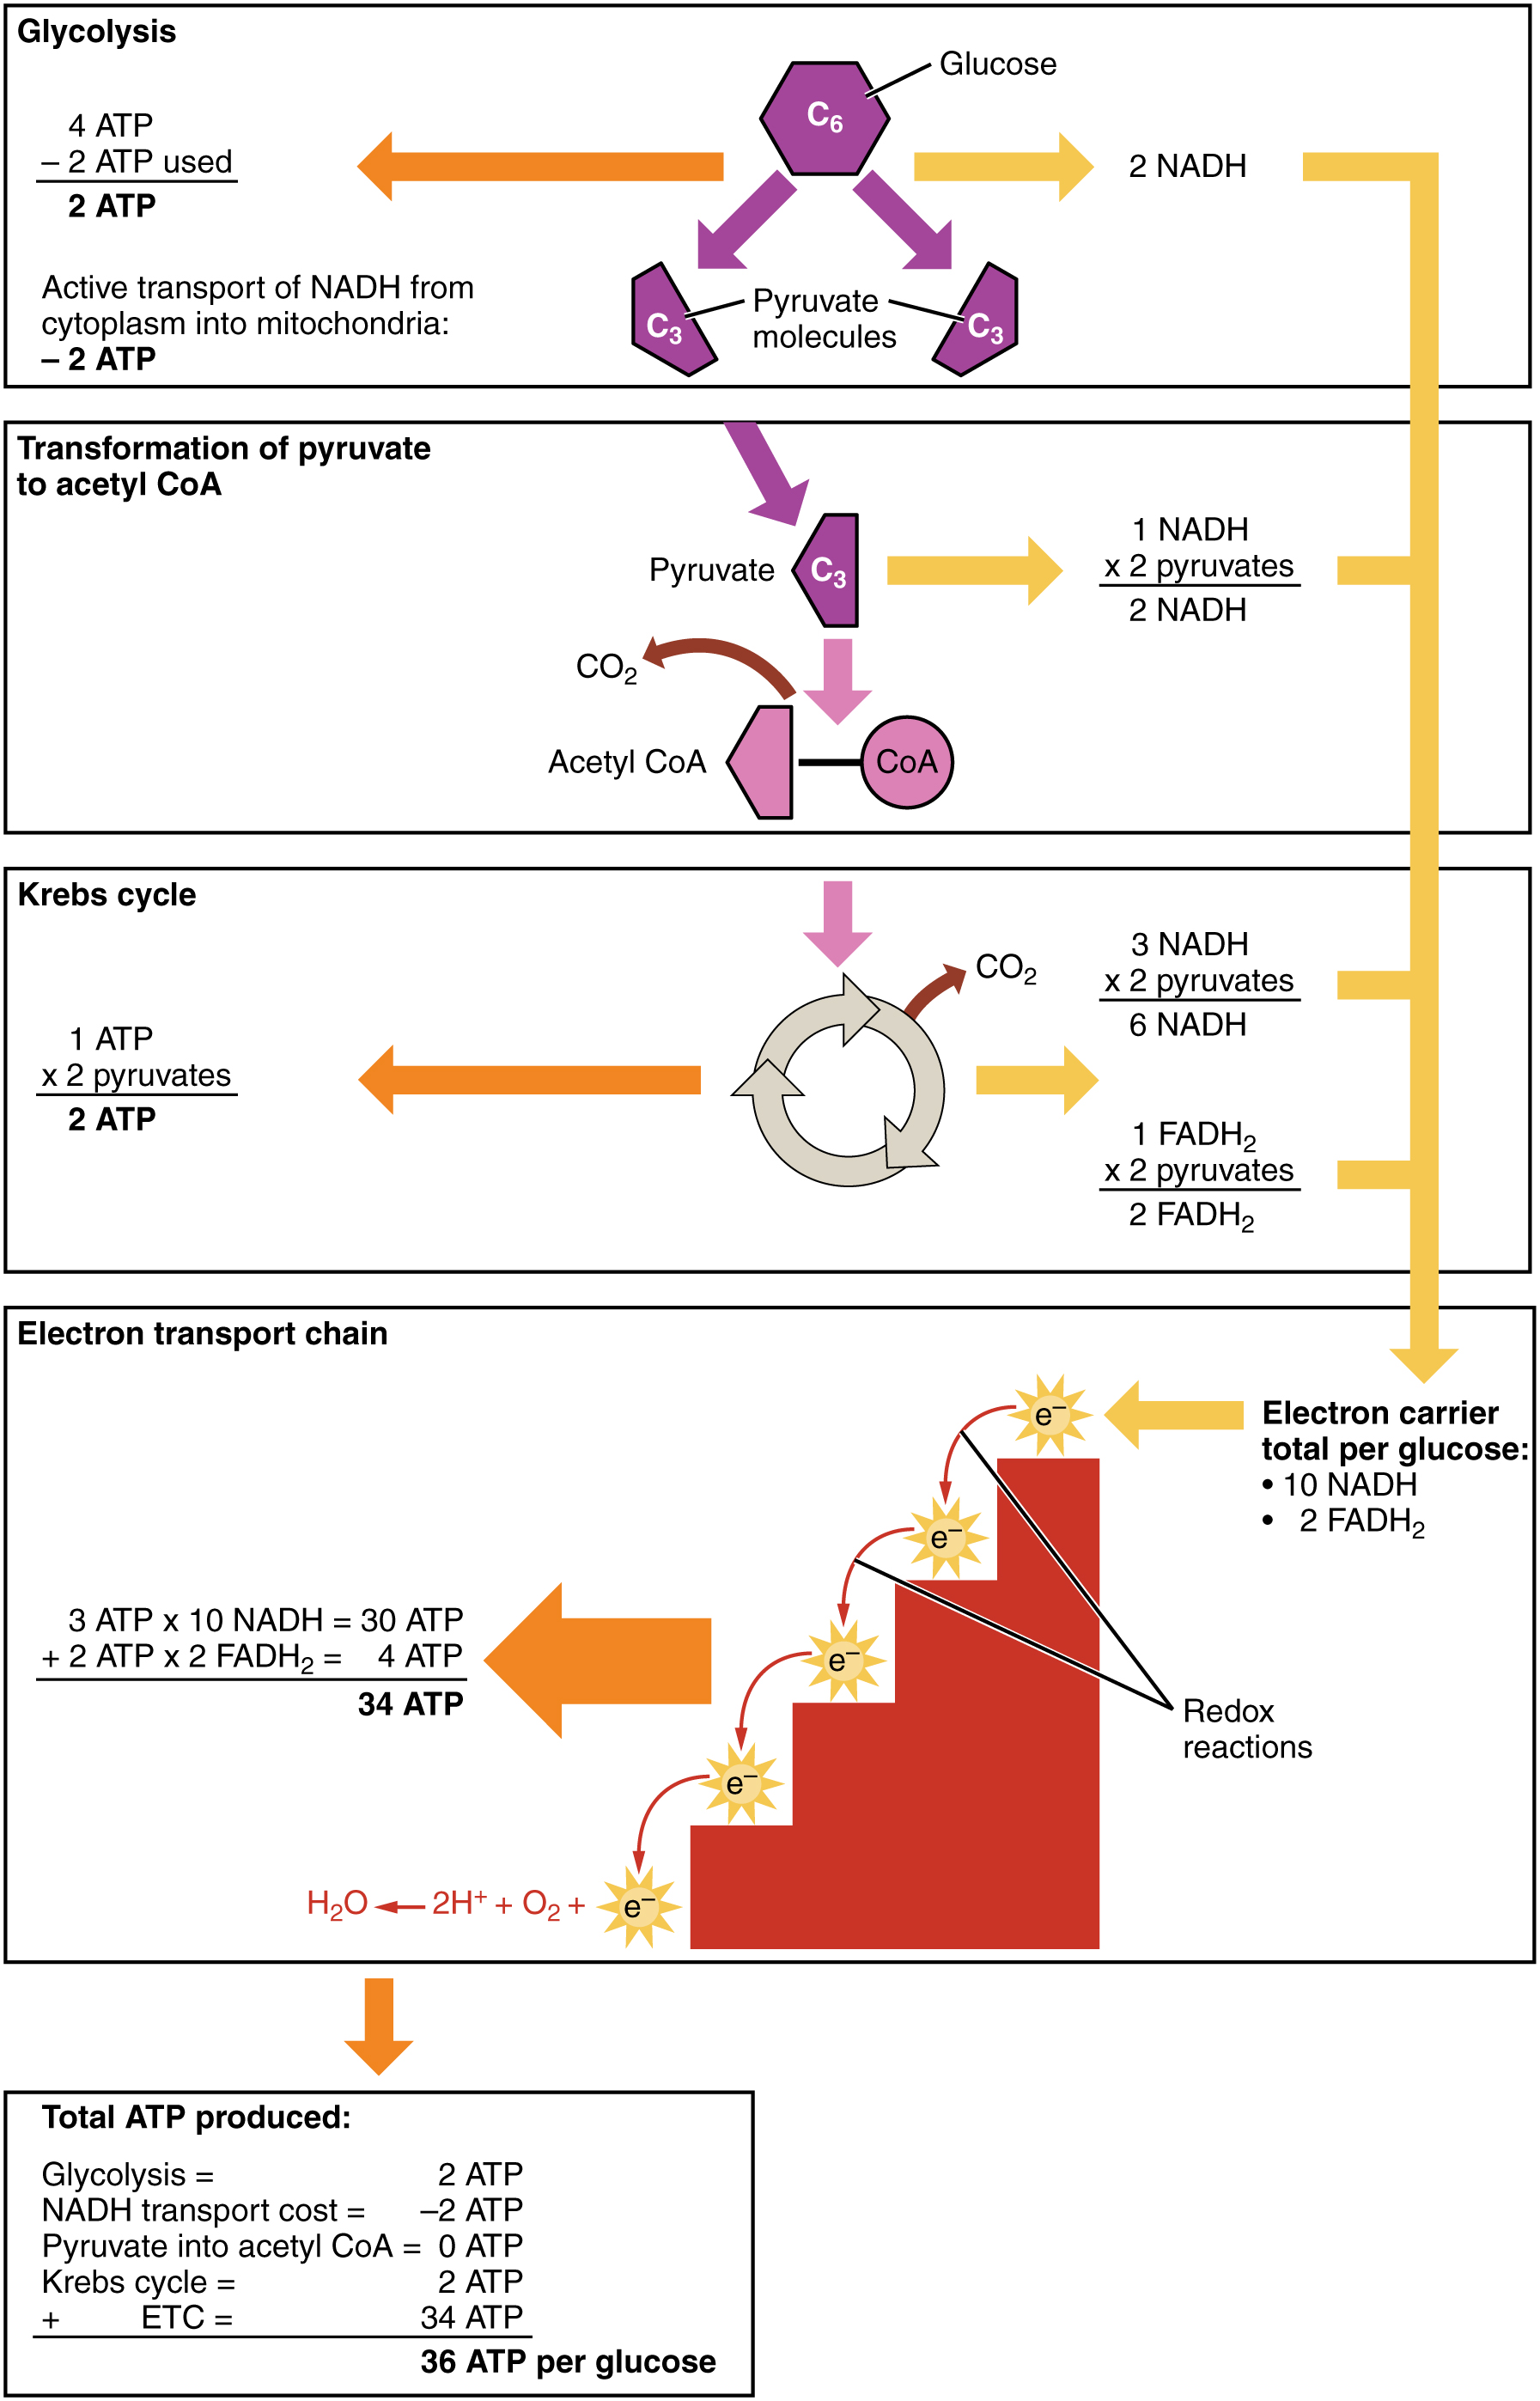 Image shows a diagram of the four stages in cellular respiration: Glycolysis, transition reaction, Kreb's cycle, and the electron transport system.